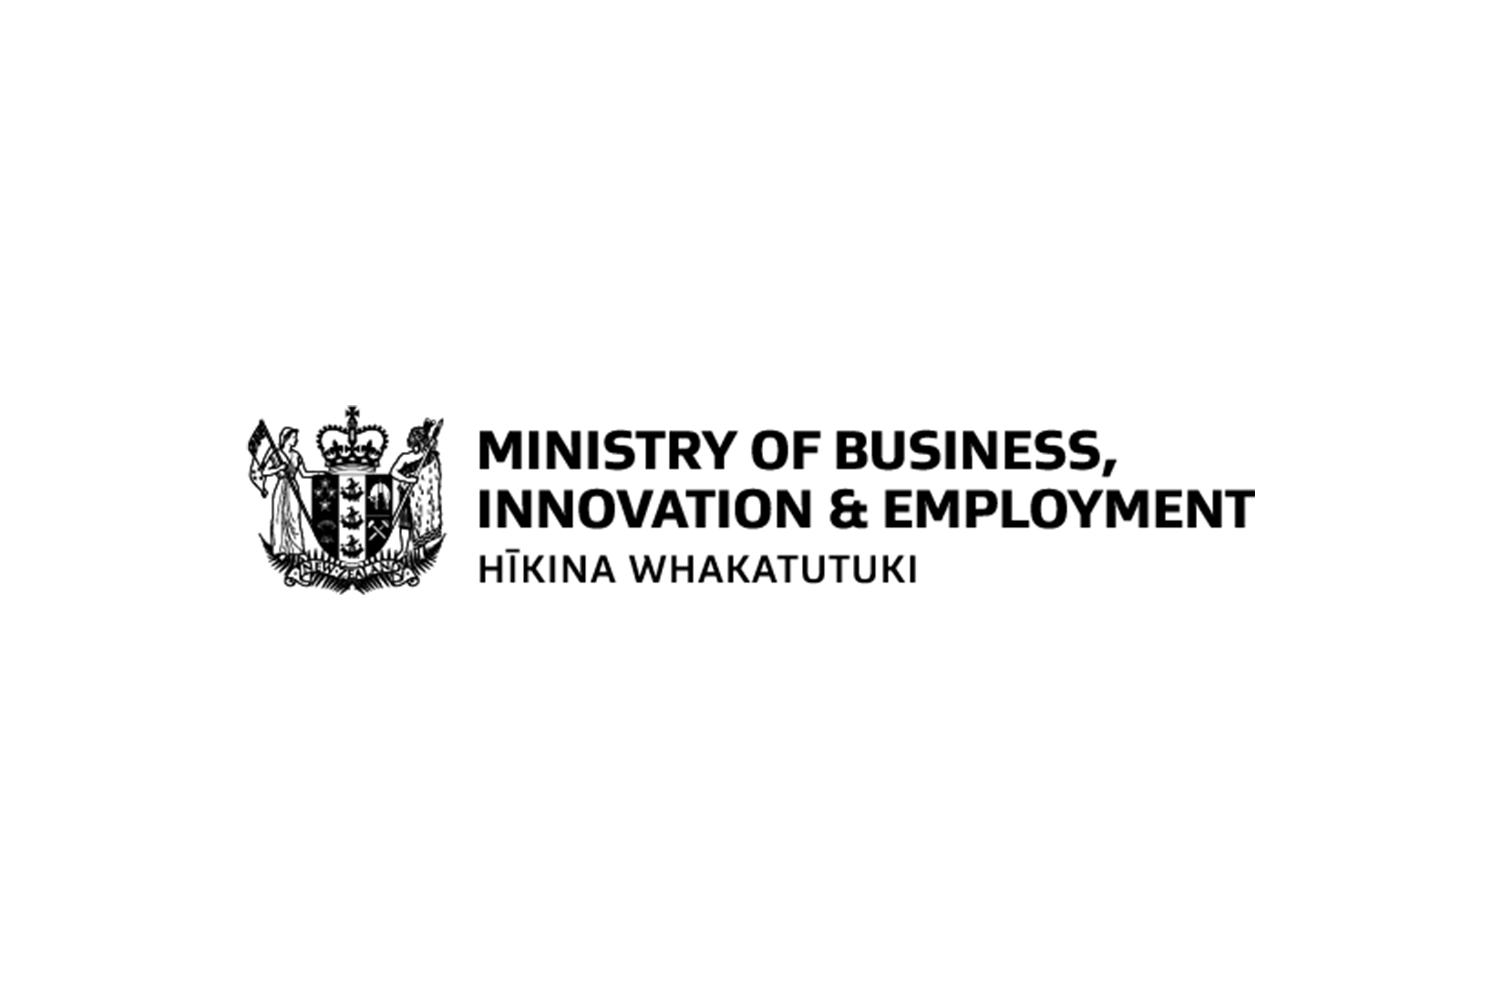 Ministry of Business